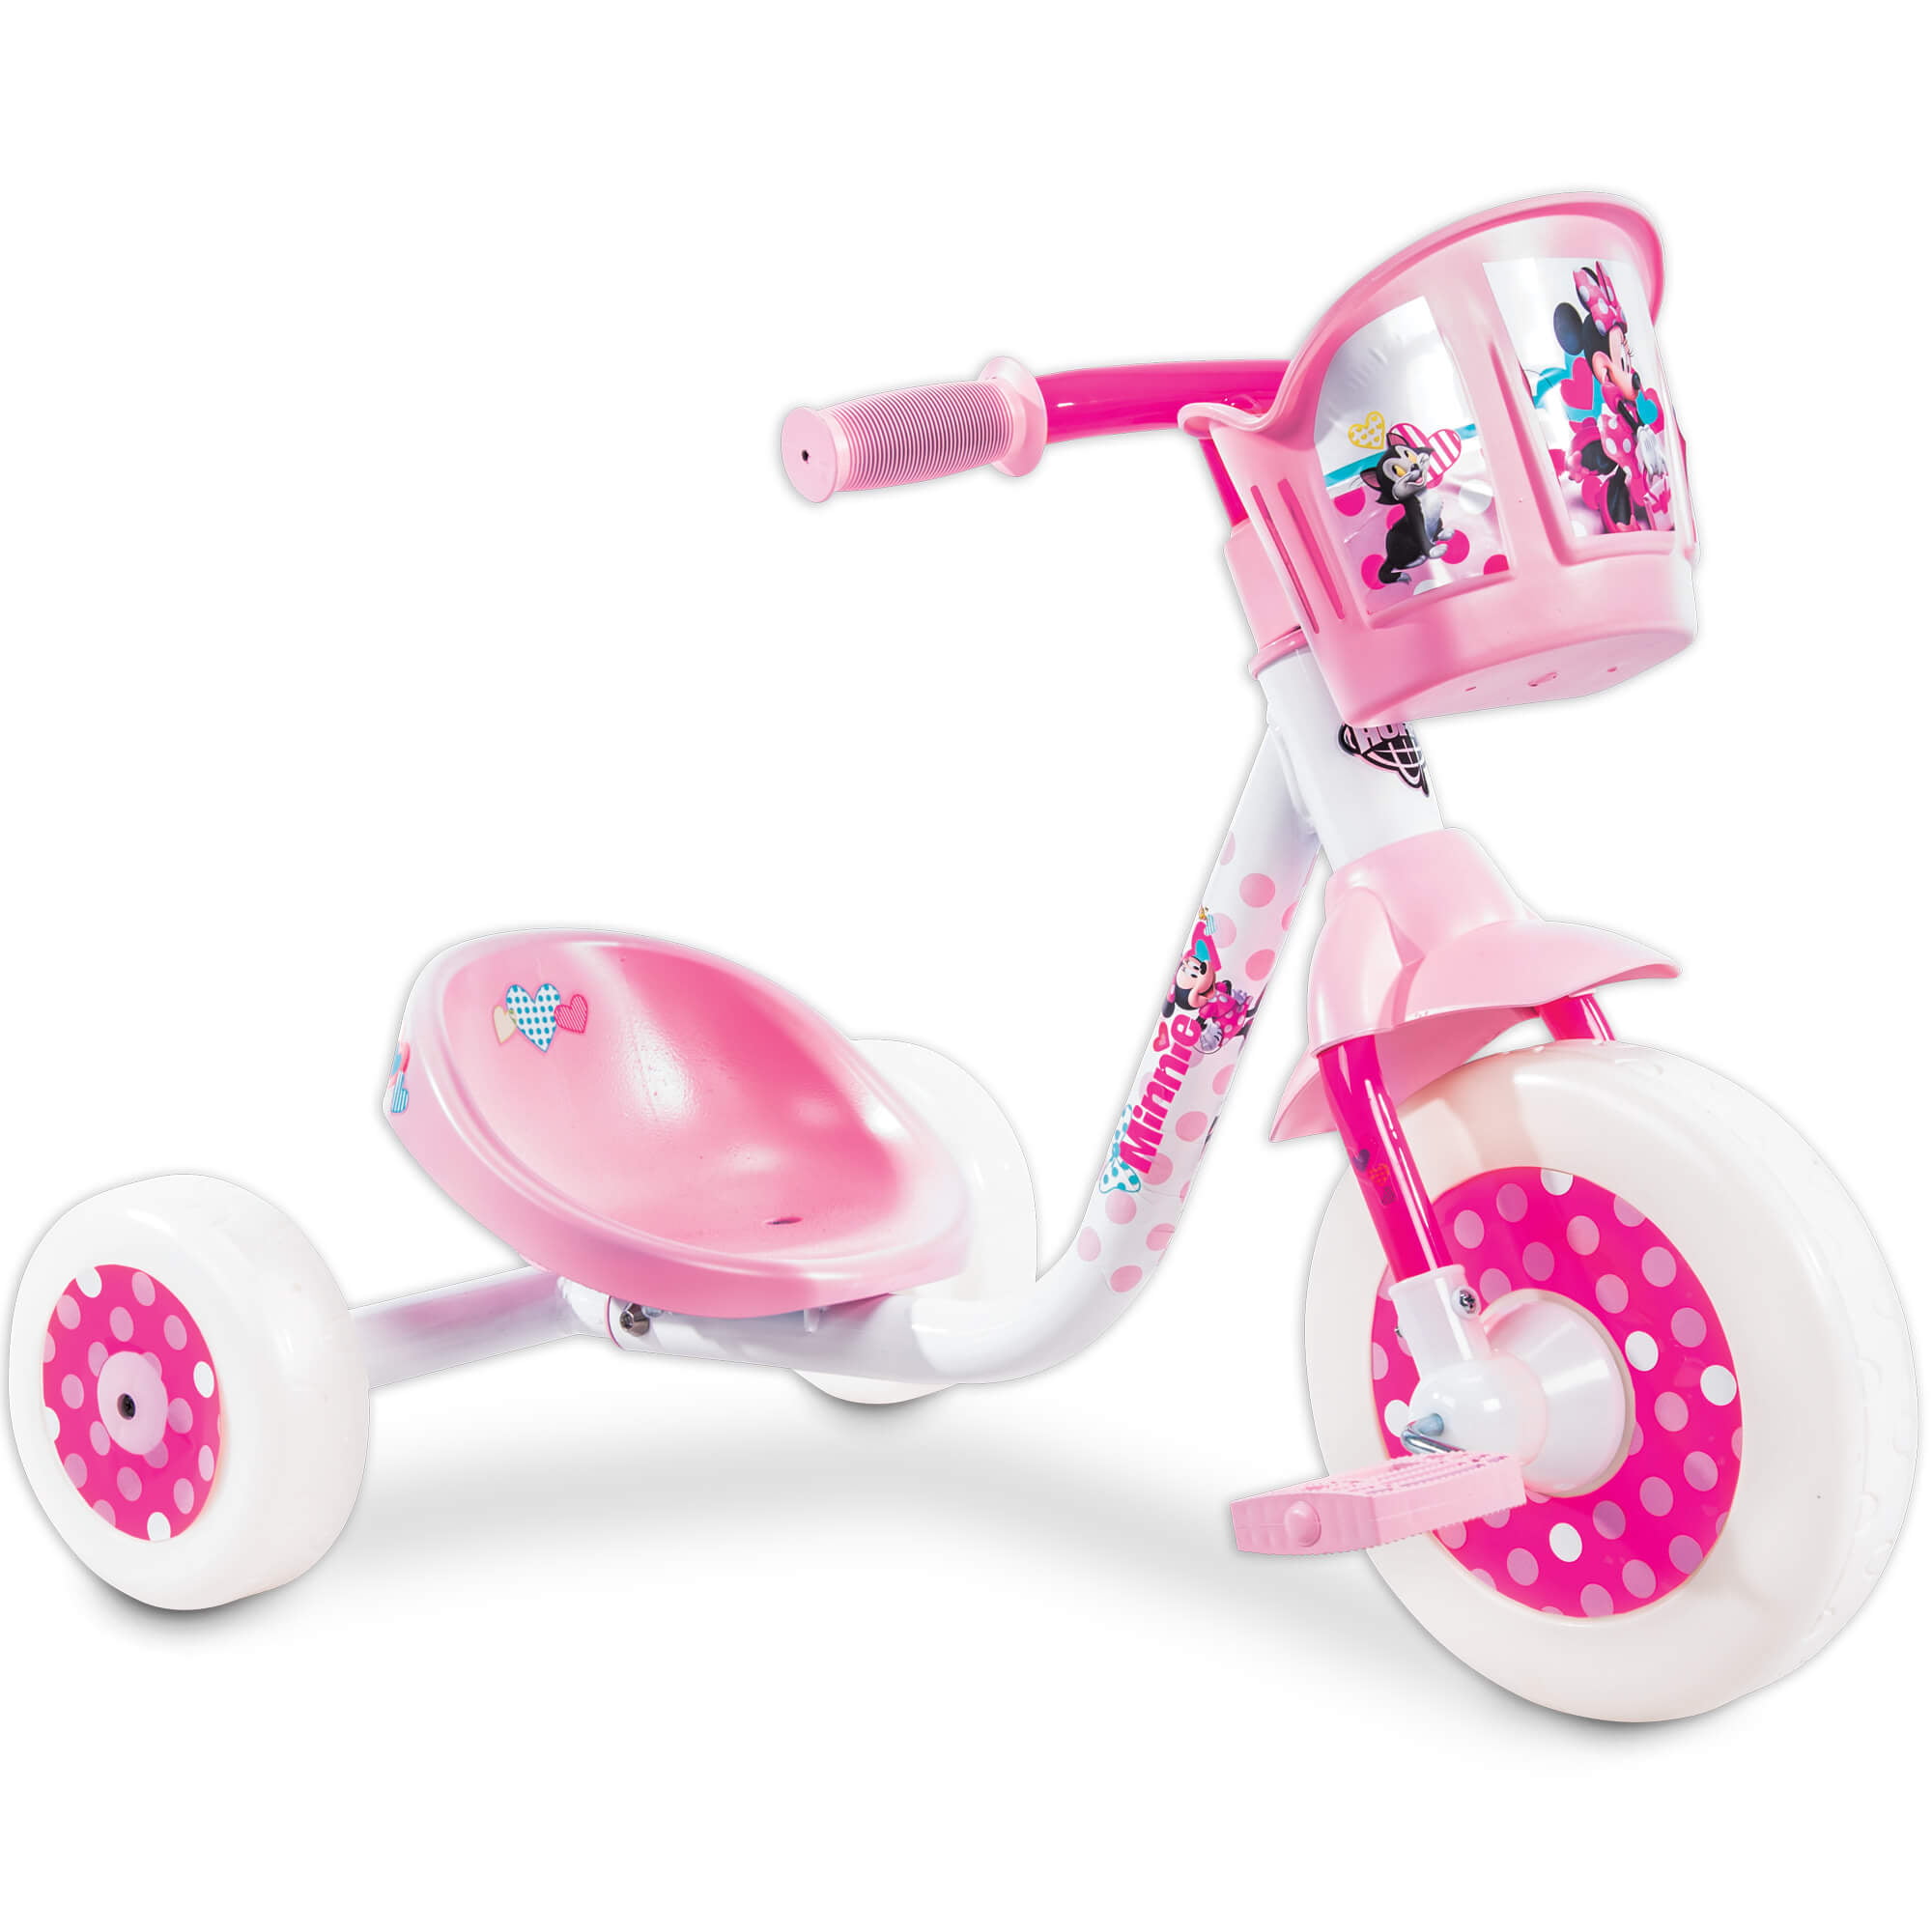 Pink//Purple Disney Minnie Bow-Tique Girls Bicycle with Push Rod